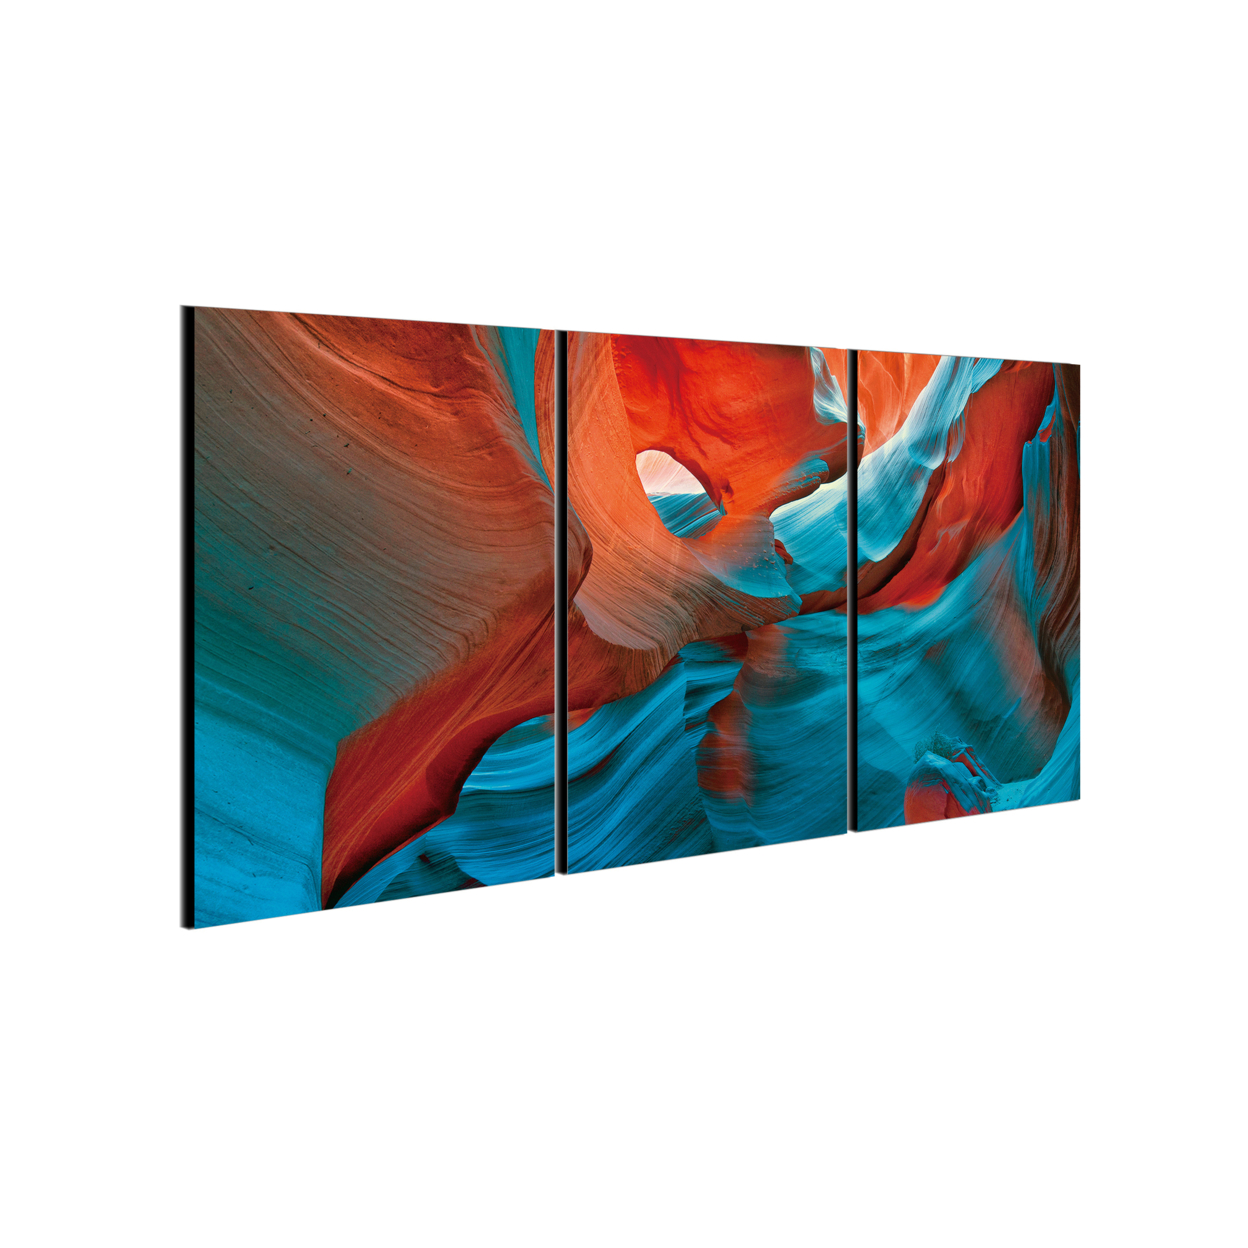 Enigma 3 Piece Wrapped Canvas Wall Art Print 27.5x60 Inches